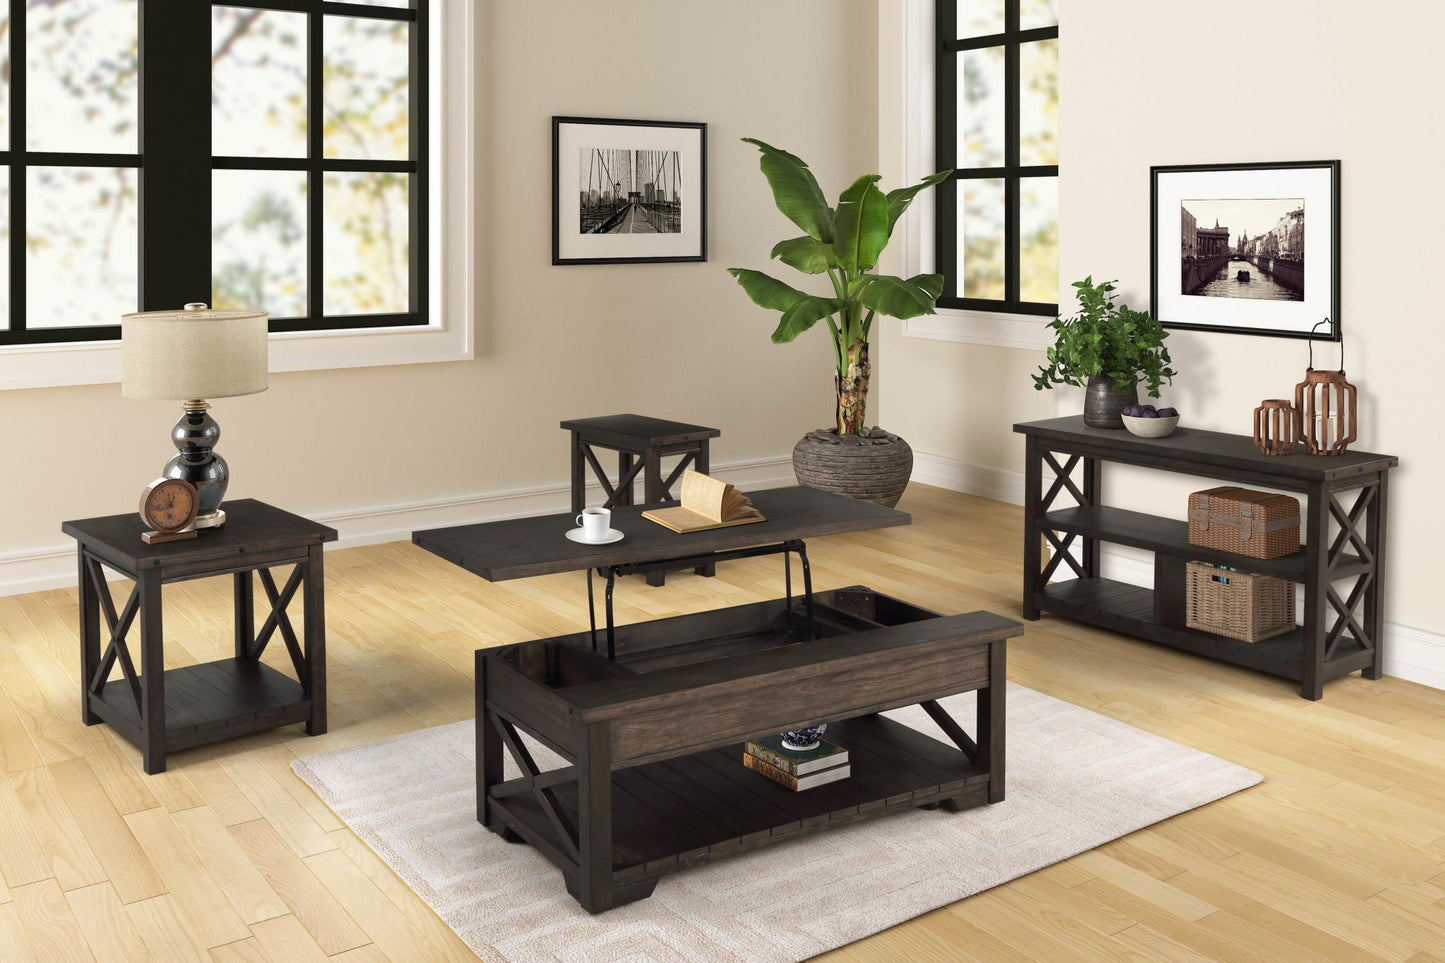 Distressed Brown Lift Top Coffee Table Set